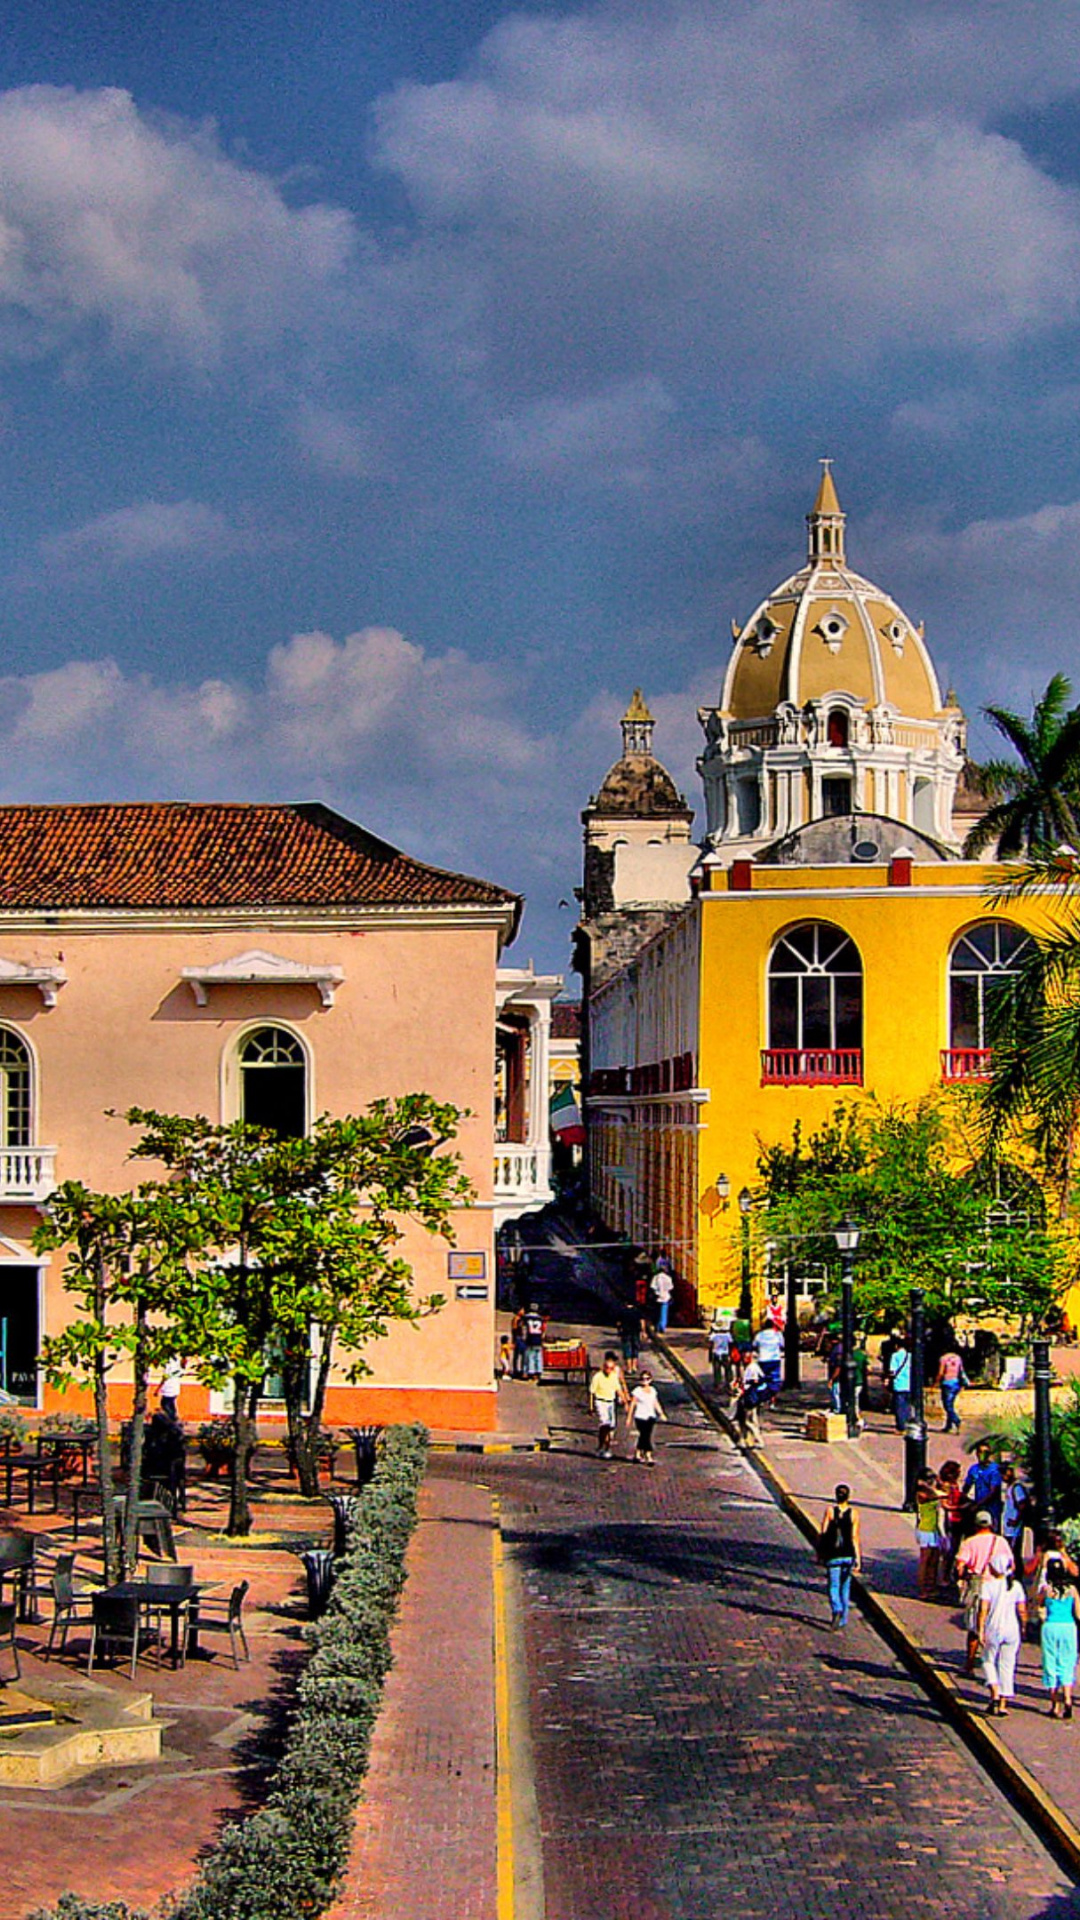 Colombia: Plaza de Santa Teresa, One of the most beautiful squares in the city, Cartagena. 1080x1920 Full HD Background.